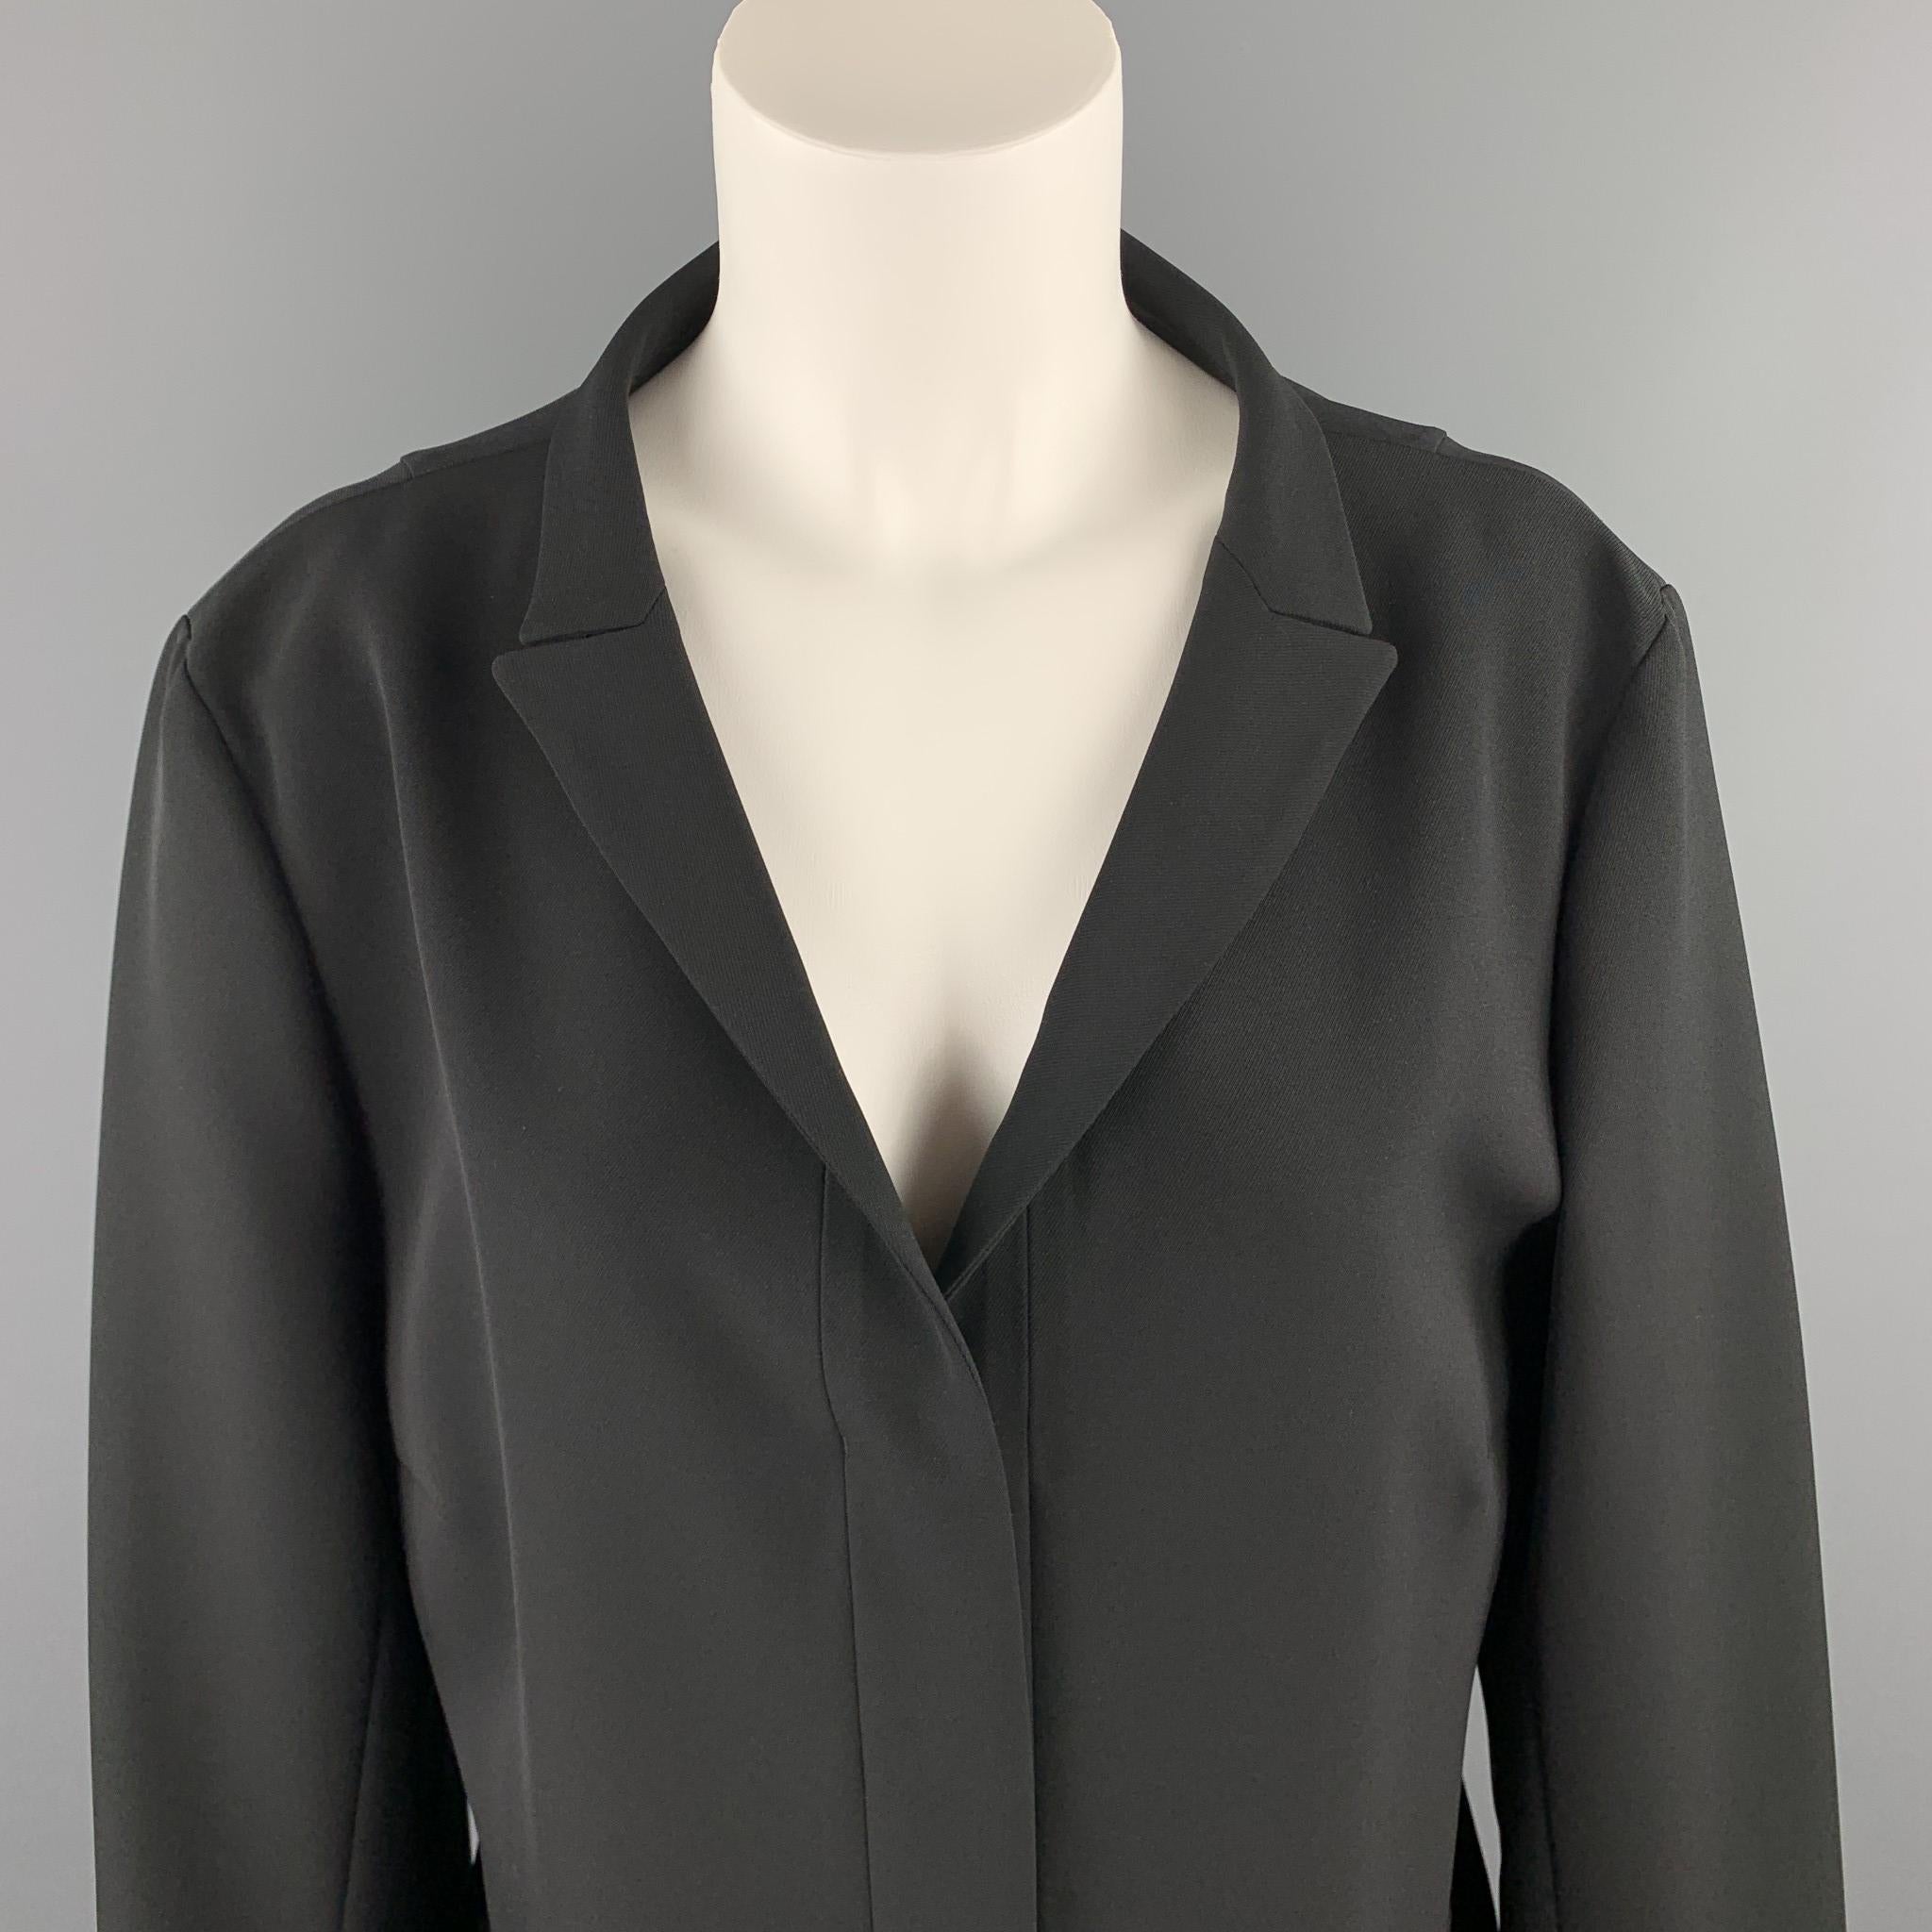 JIL SANDER blazer coat comes in black twill with a wide notch lapel neckline, slit pockets, and hidden placket button front. Made in Italy.

Excellent Pre-Owned Condition.
Marked: IT 40

Measurements:

Shoulder: 19 in.
Bust: 41 in.
Sleeve: 22